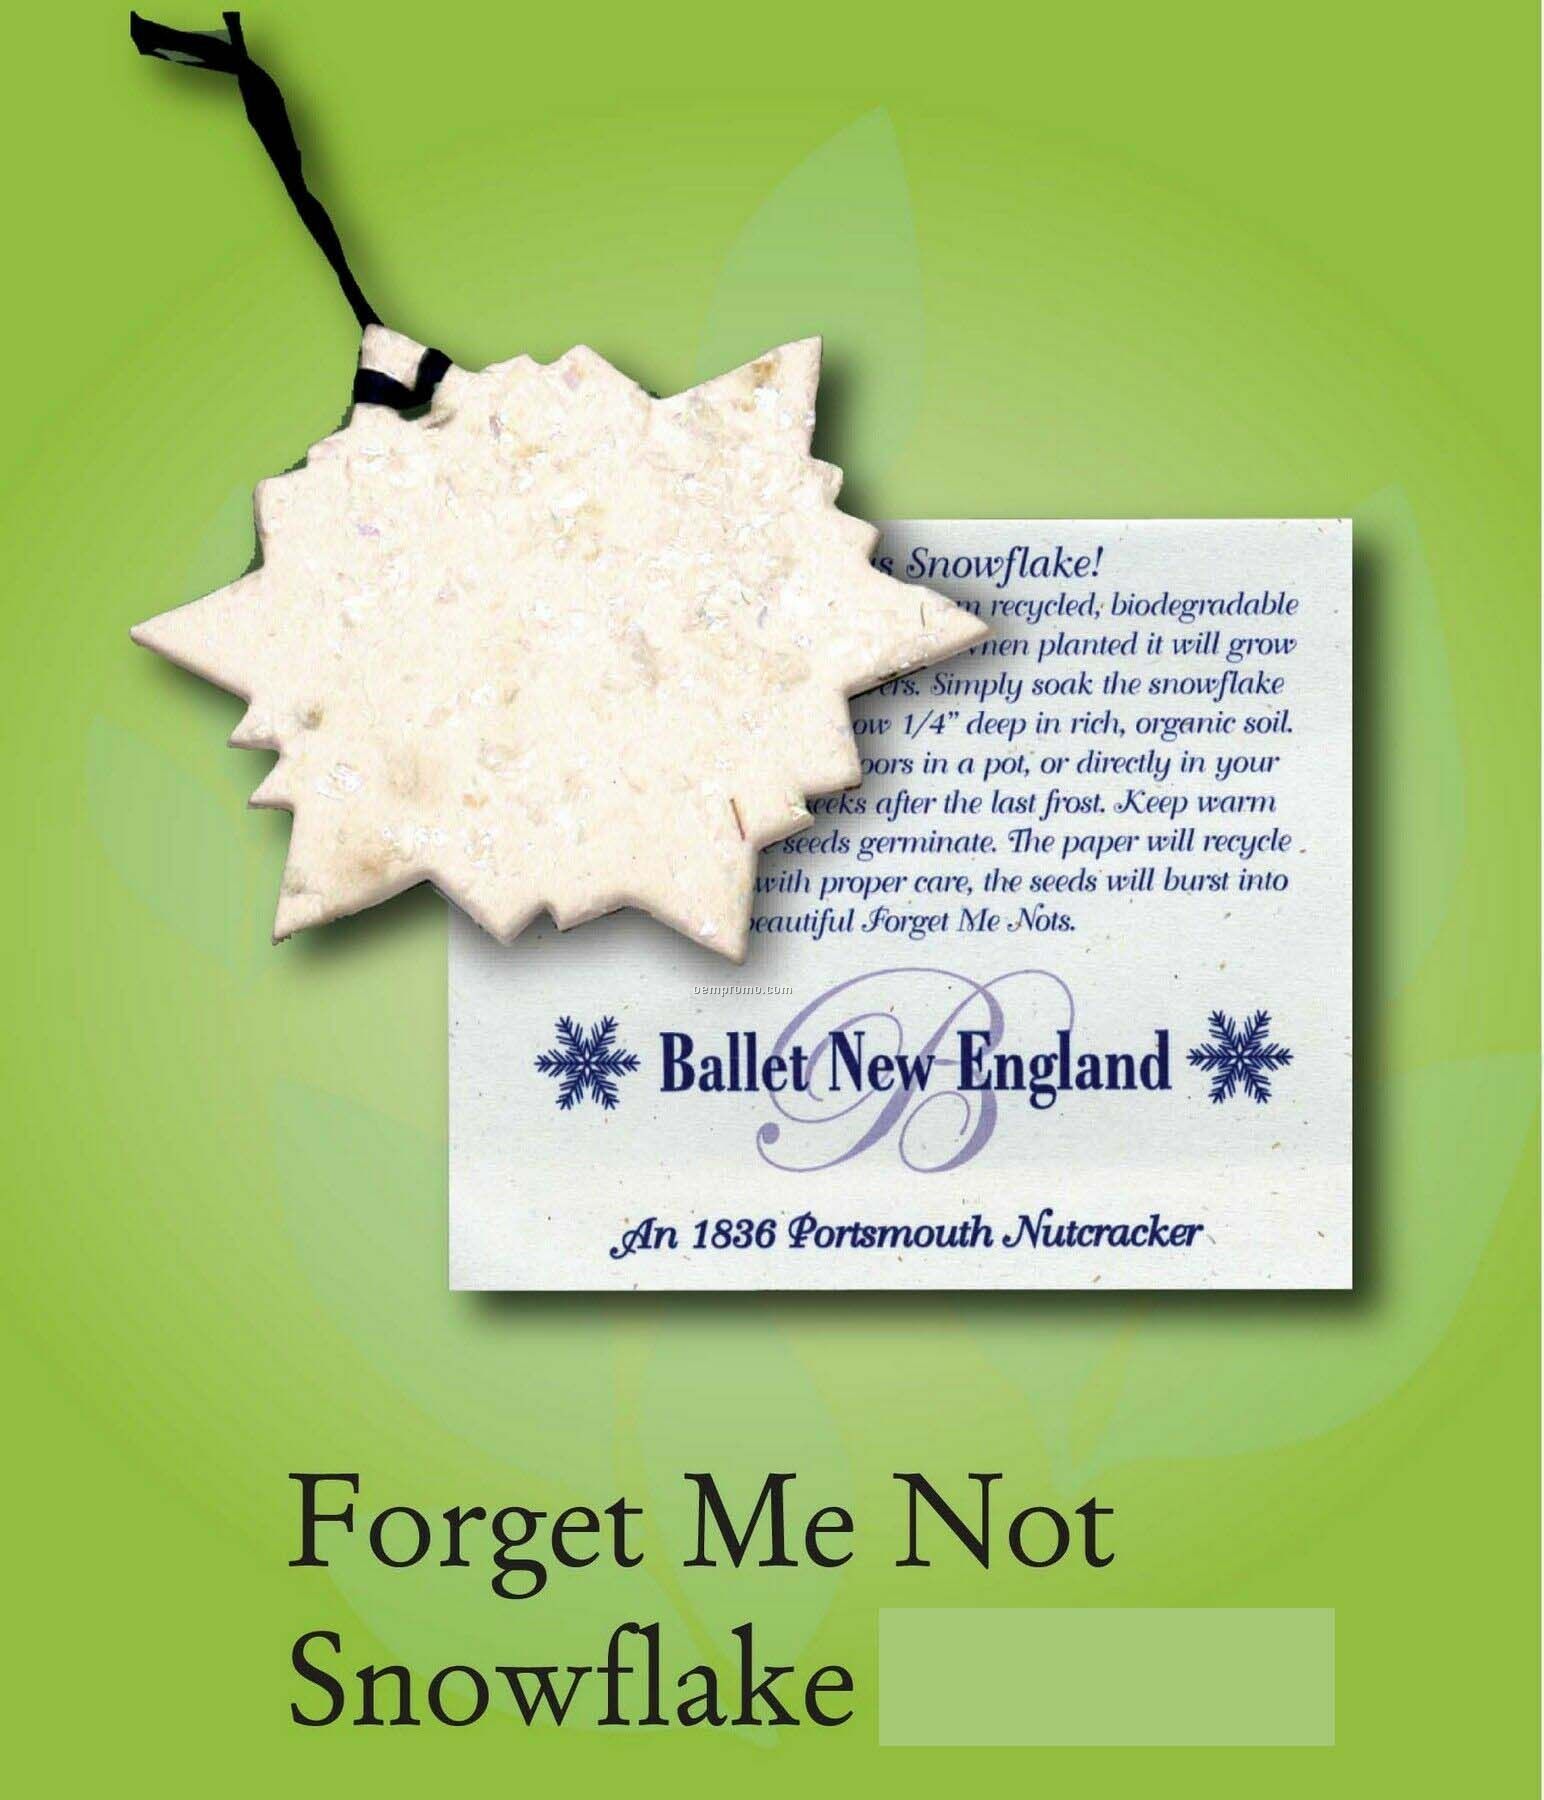 Forget Me Not Snowflake Ornament With Embedded Seed